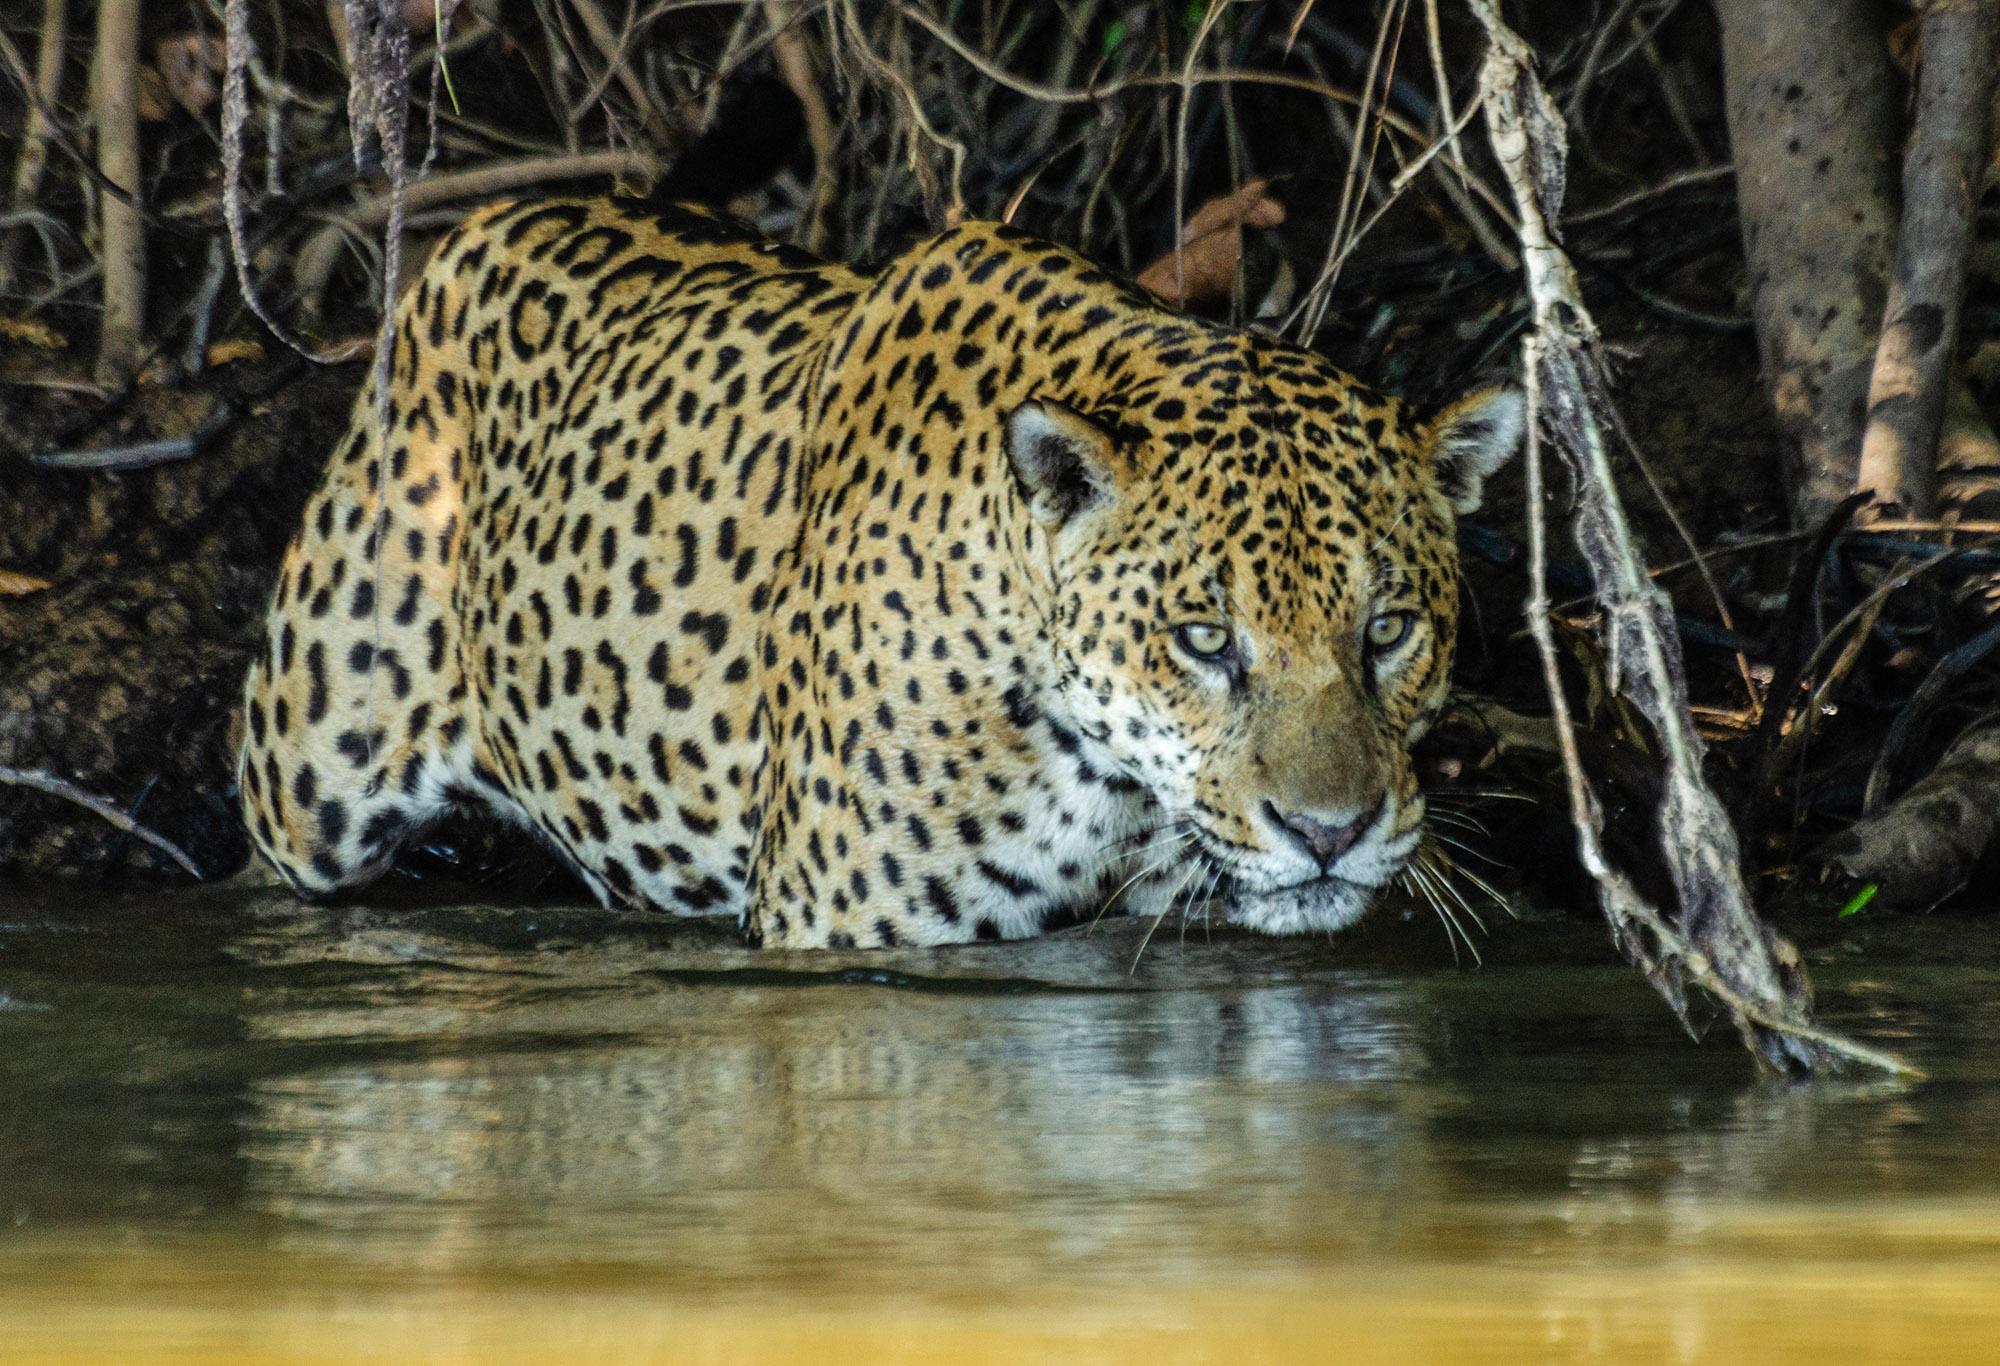 Jaguars in the northern Pantanal wetlands in Brazil were observed eating mainly fish and reptiles, which is unusual for the species. (Daniel Kantek/Zenger)